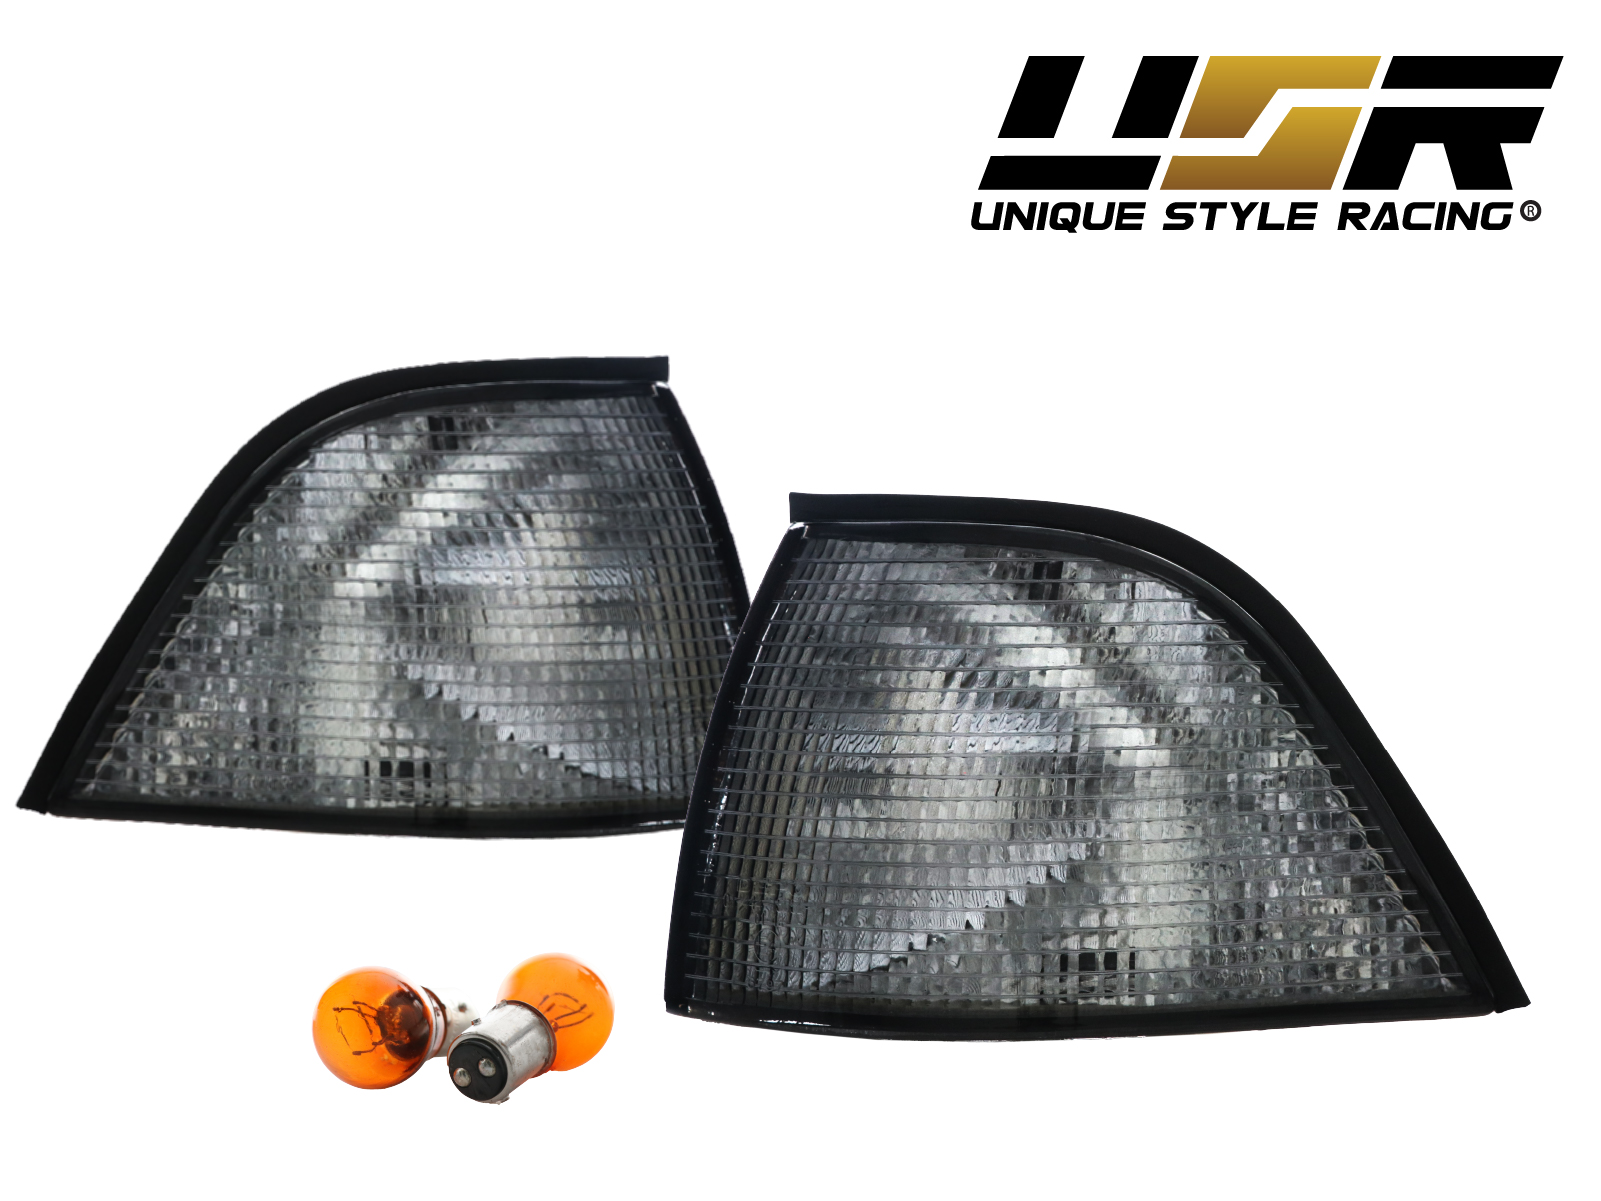 Glass Lens Projector Headlight+Clear Corner Lights For BMW E36 2D COUPE